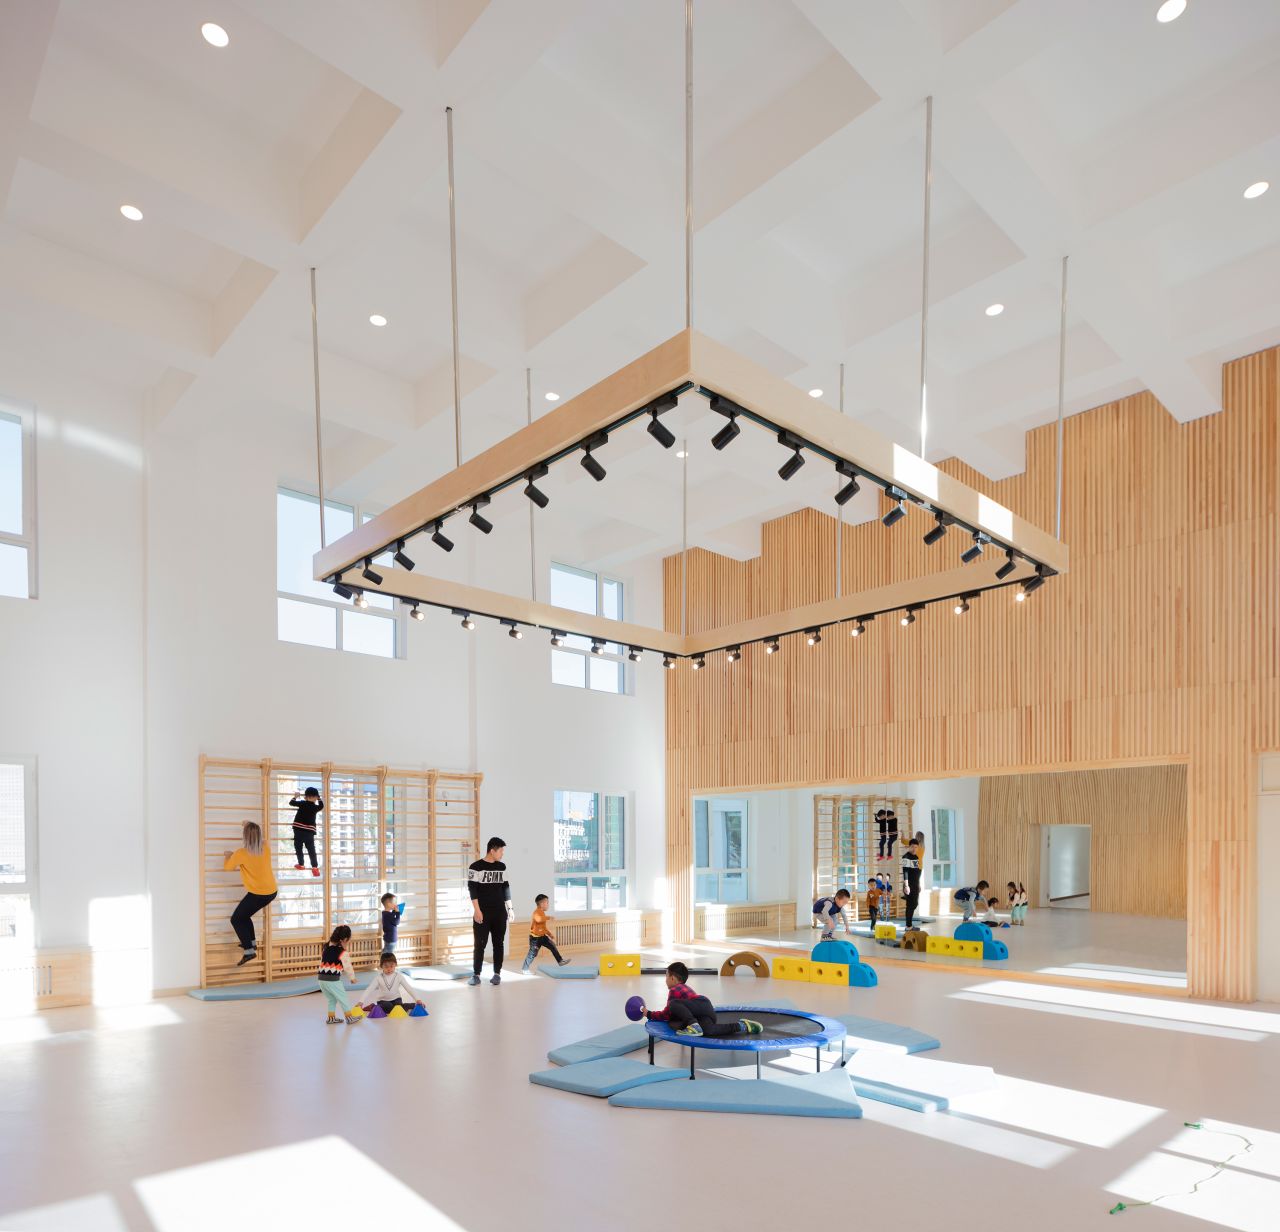 HEI Schools also uses Finnish designers and architects to build inspiring spaces.